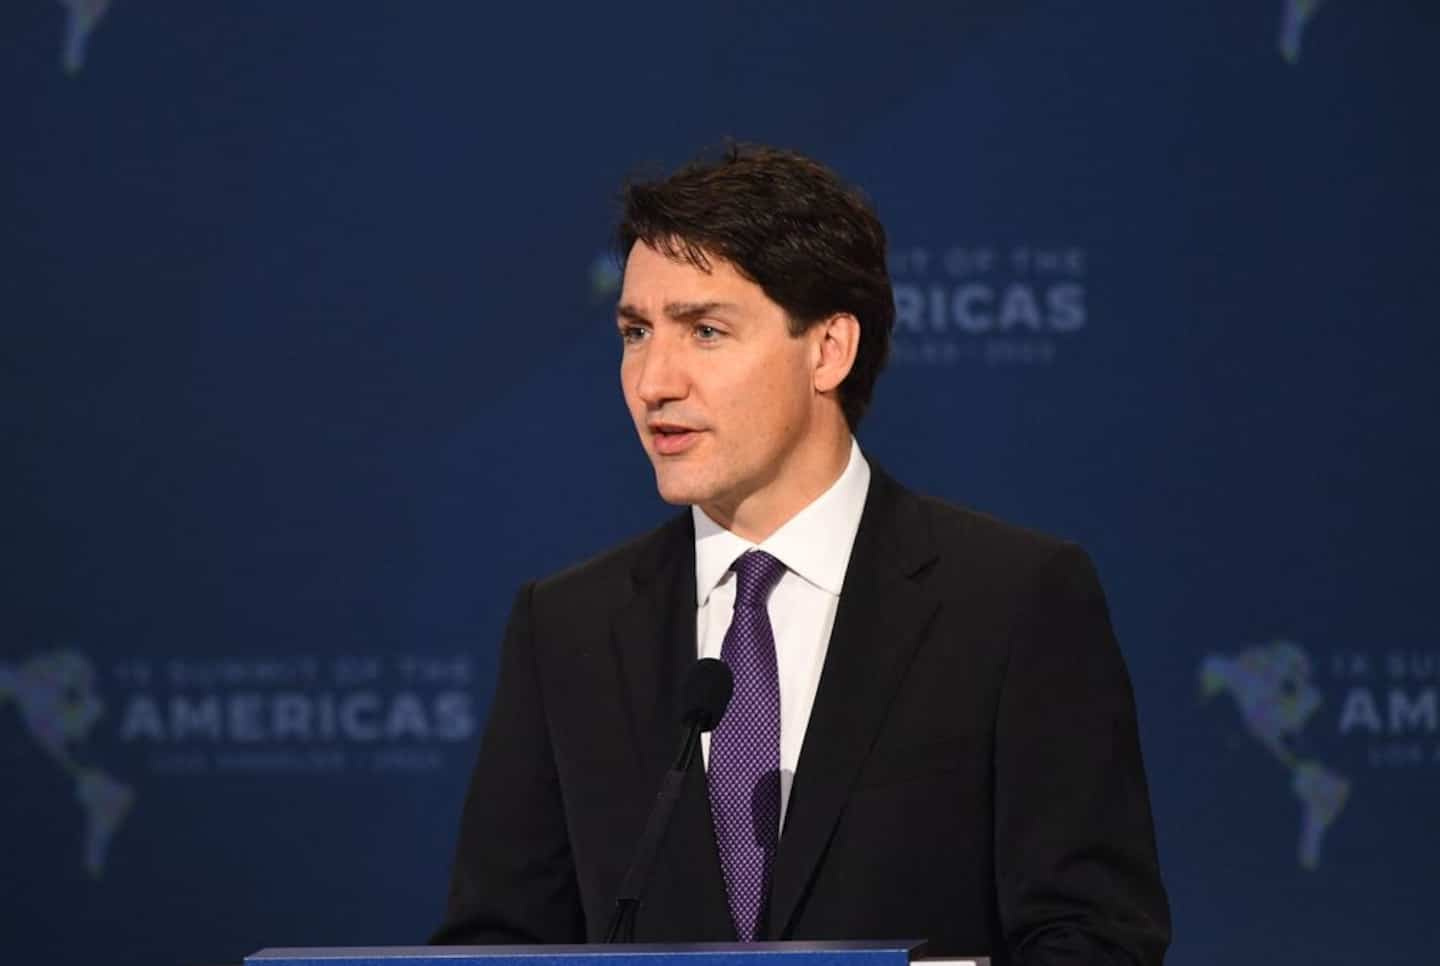 Abortion rights violated in the United States: Trudeau and Legault react